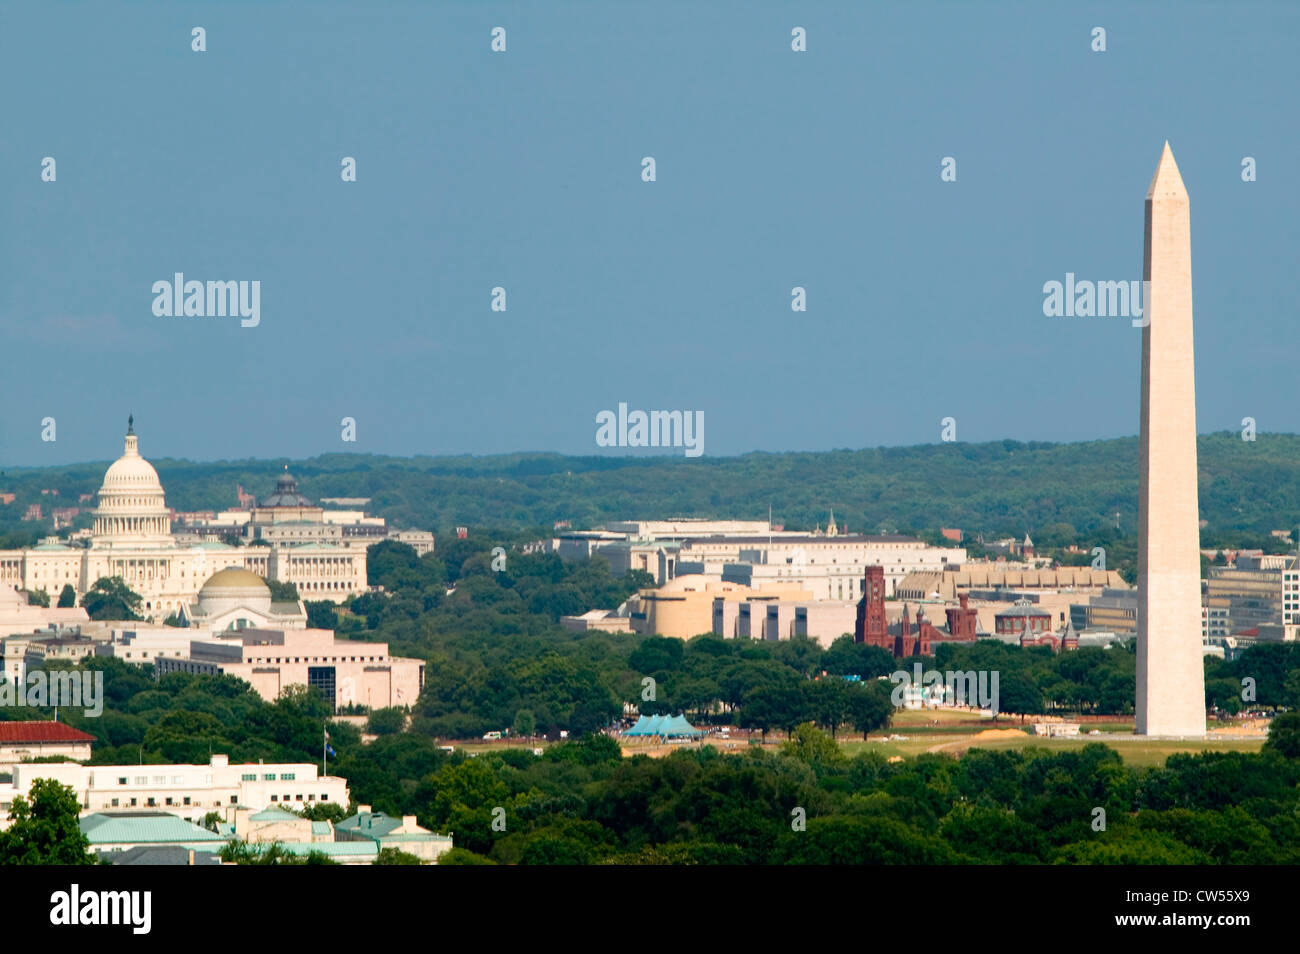 Washington D.C. aerial view with US Capitol and Washington Monument in view Stock Photo